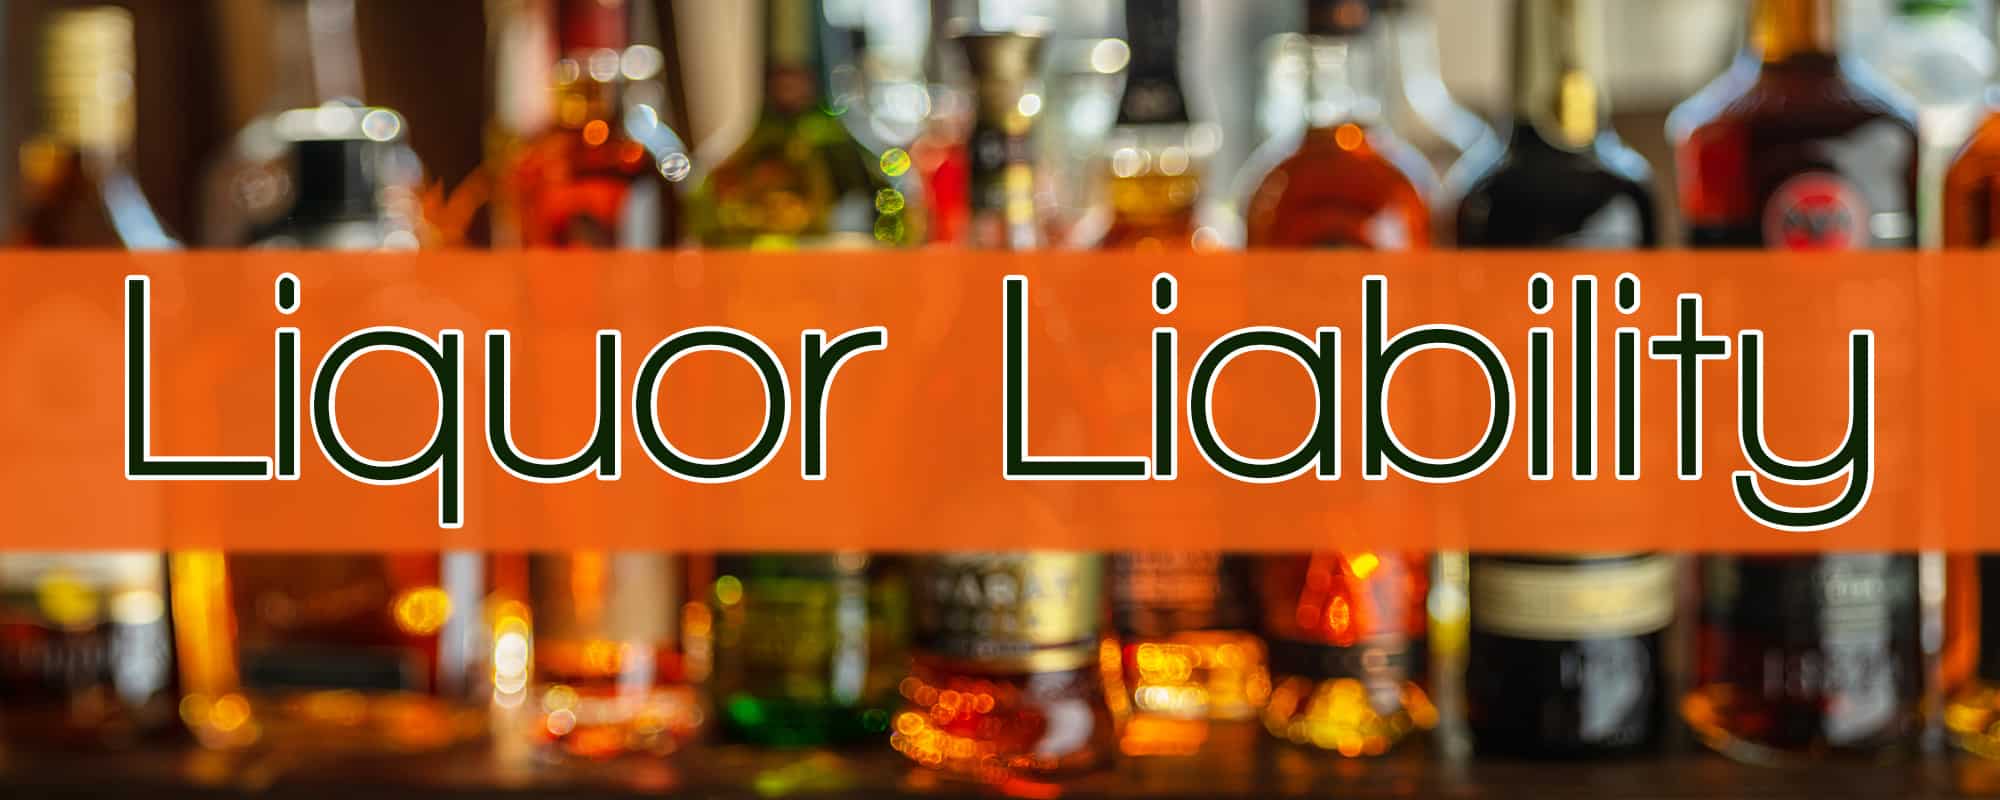 Liquor Liability Southern General Agency